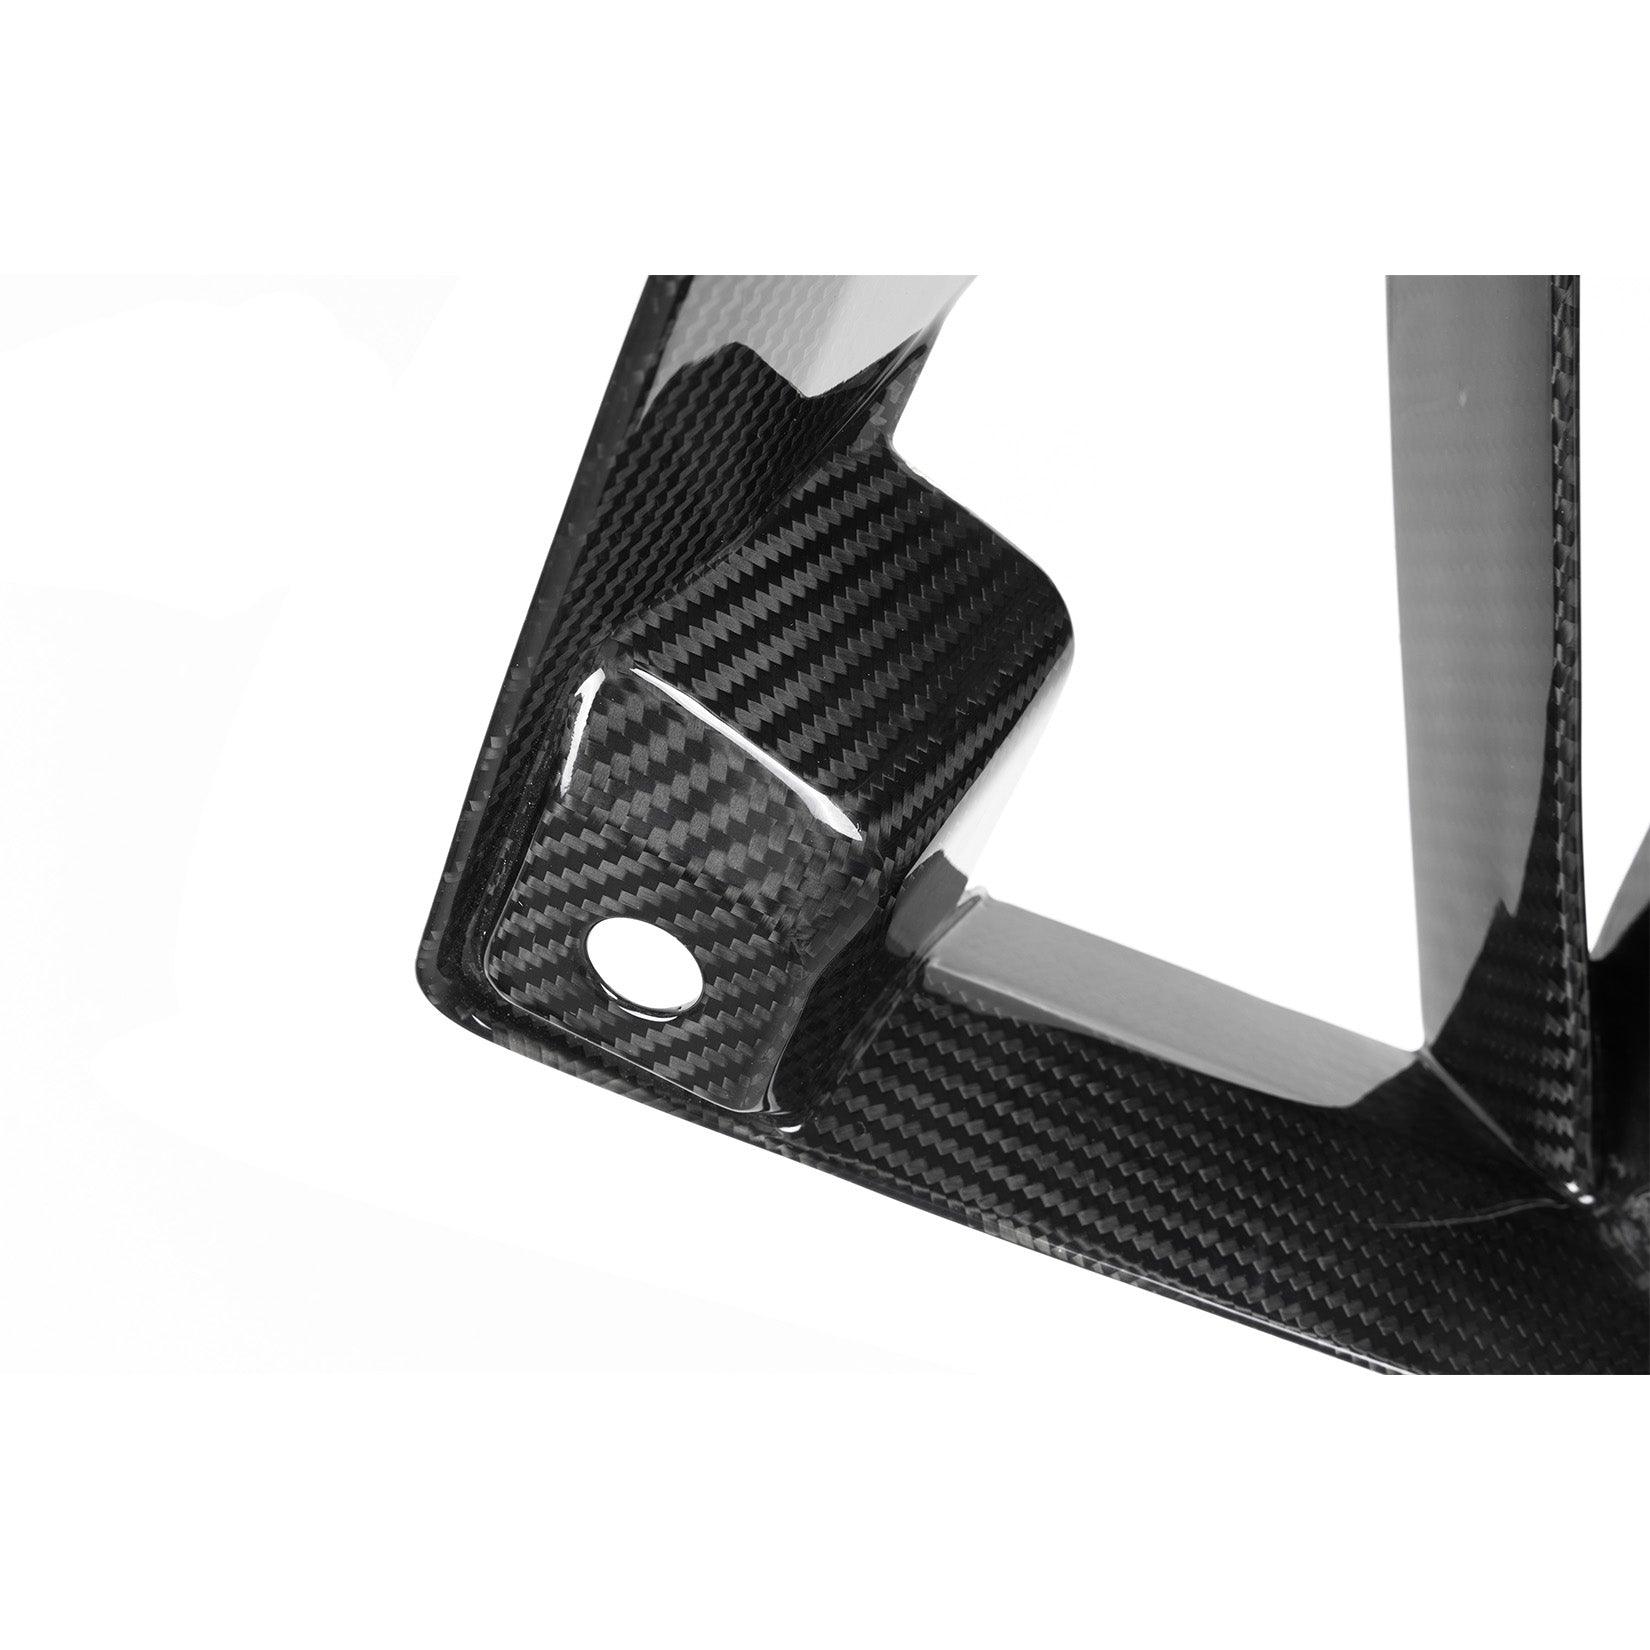 BMW M2 G87 PRE PREG CARBON FIBRE FRONT INTAKE DUCT INSERTS - RisperStyling